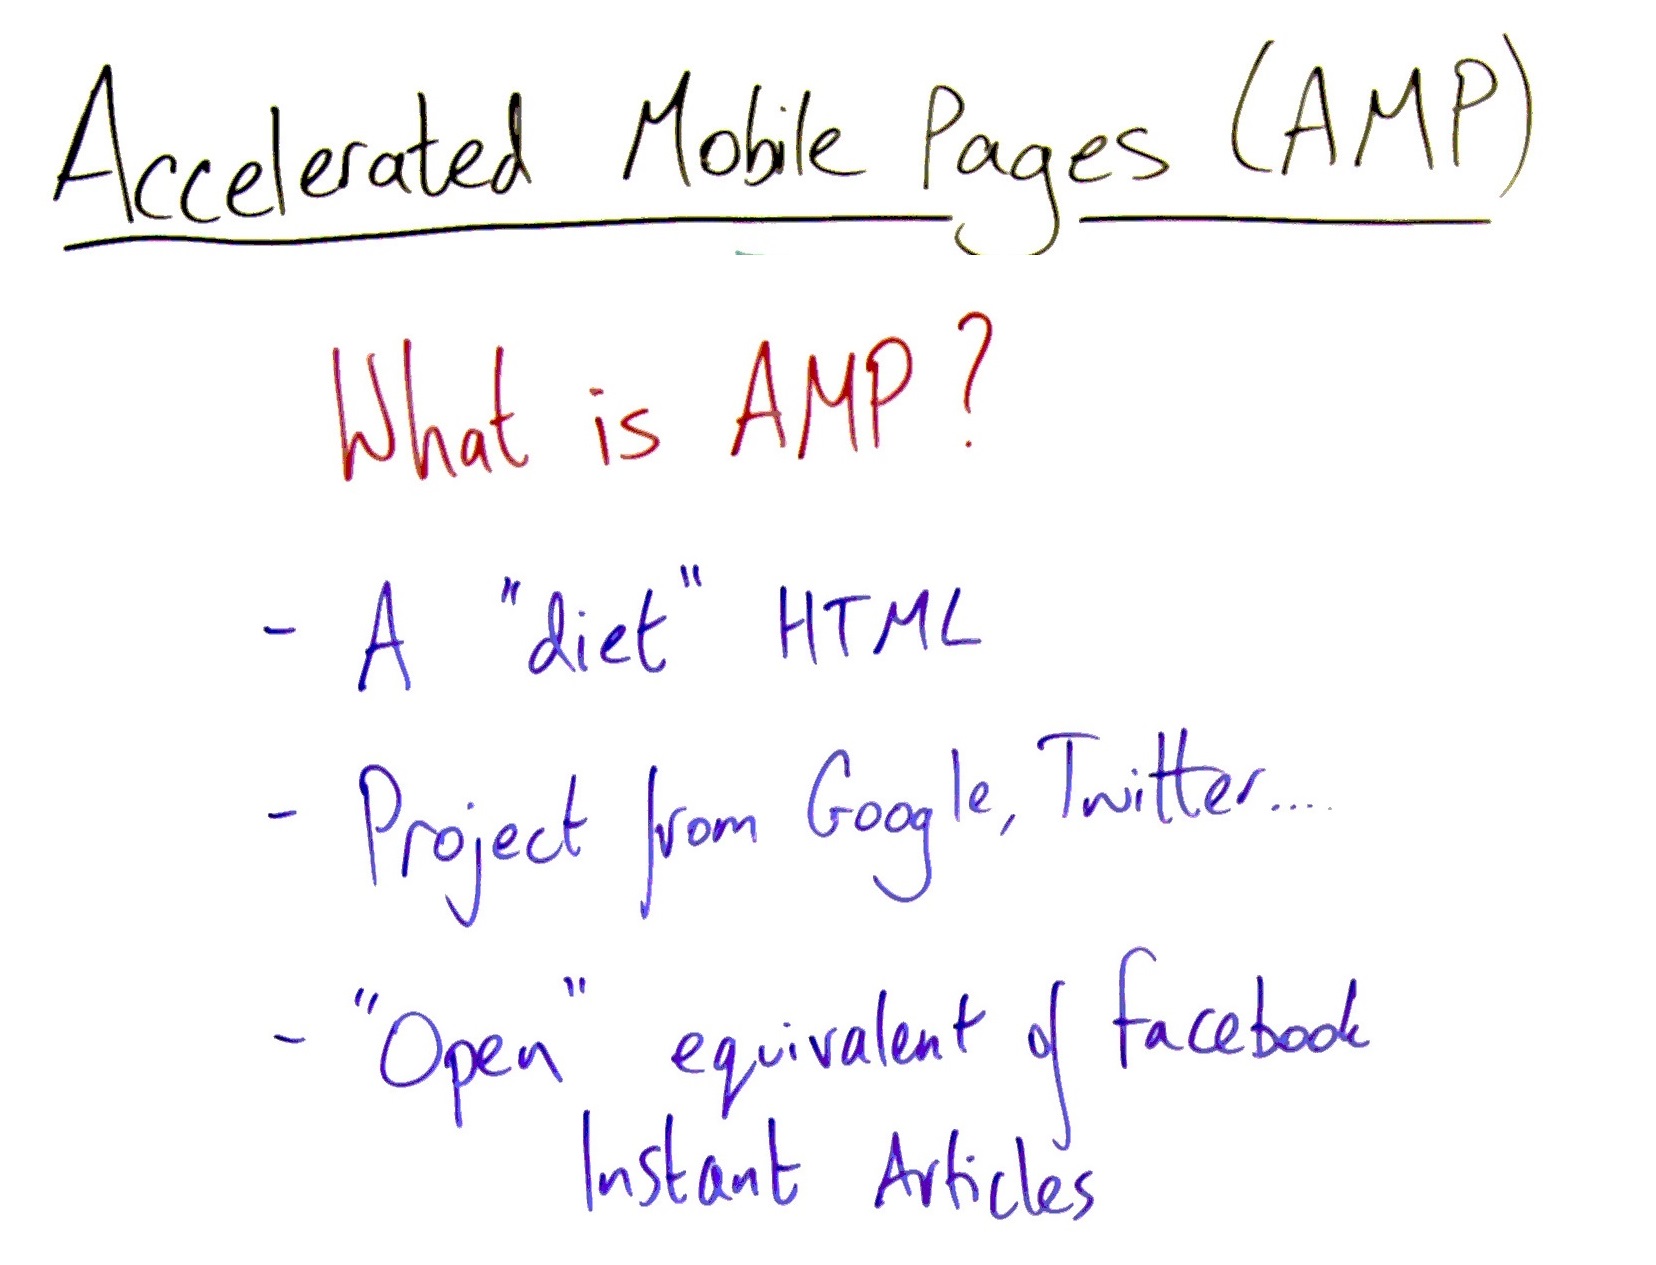 AMP PAGE RANKING BEGINS 